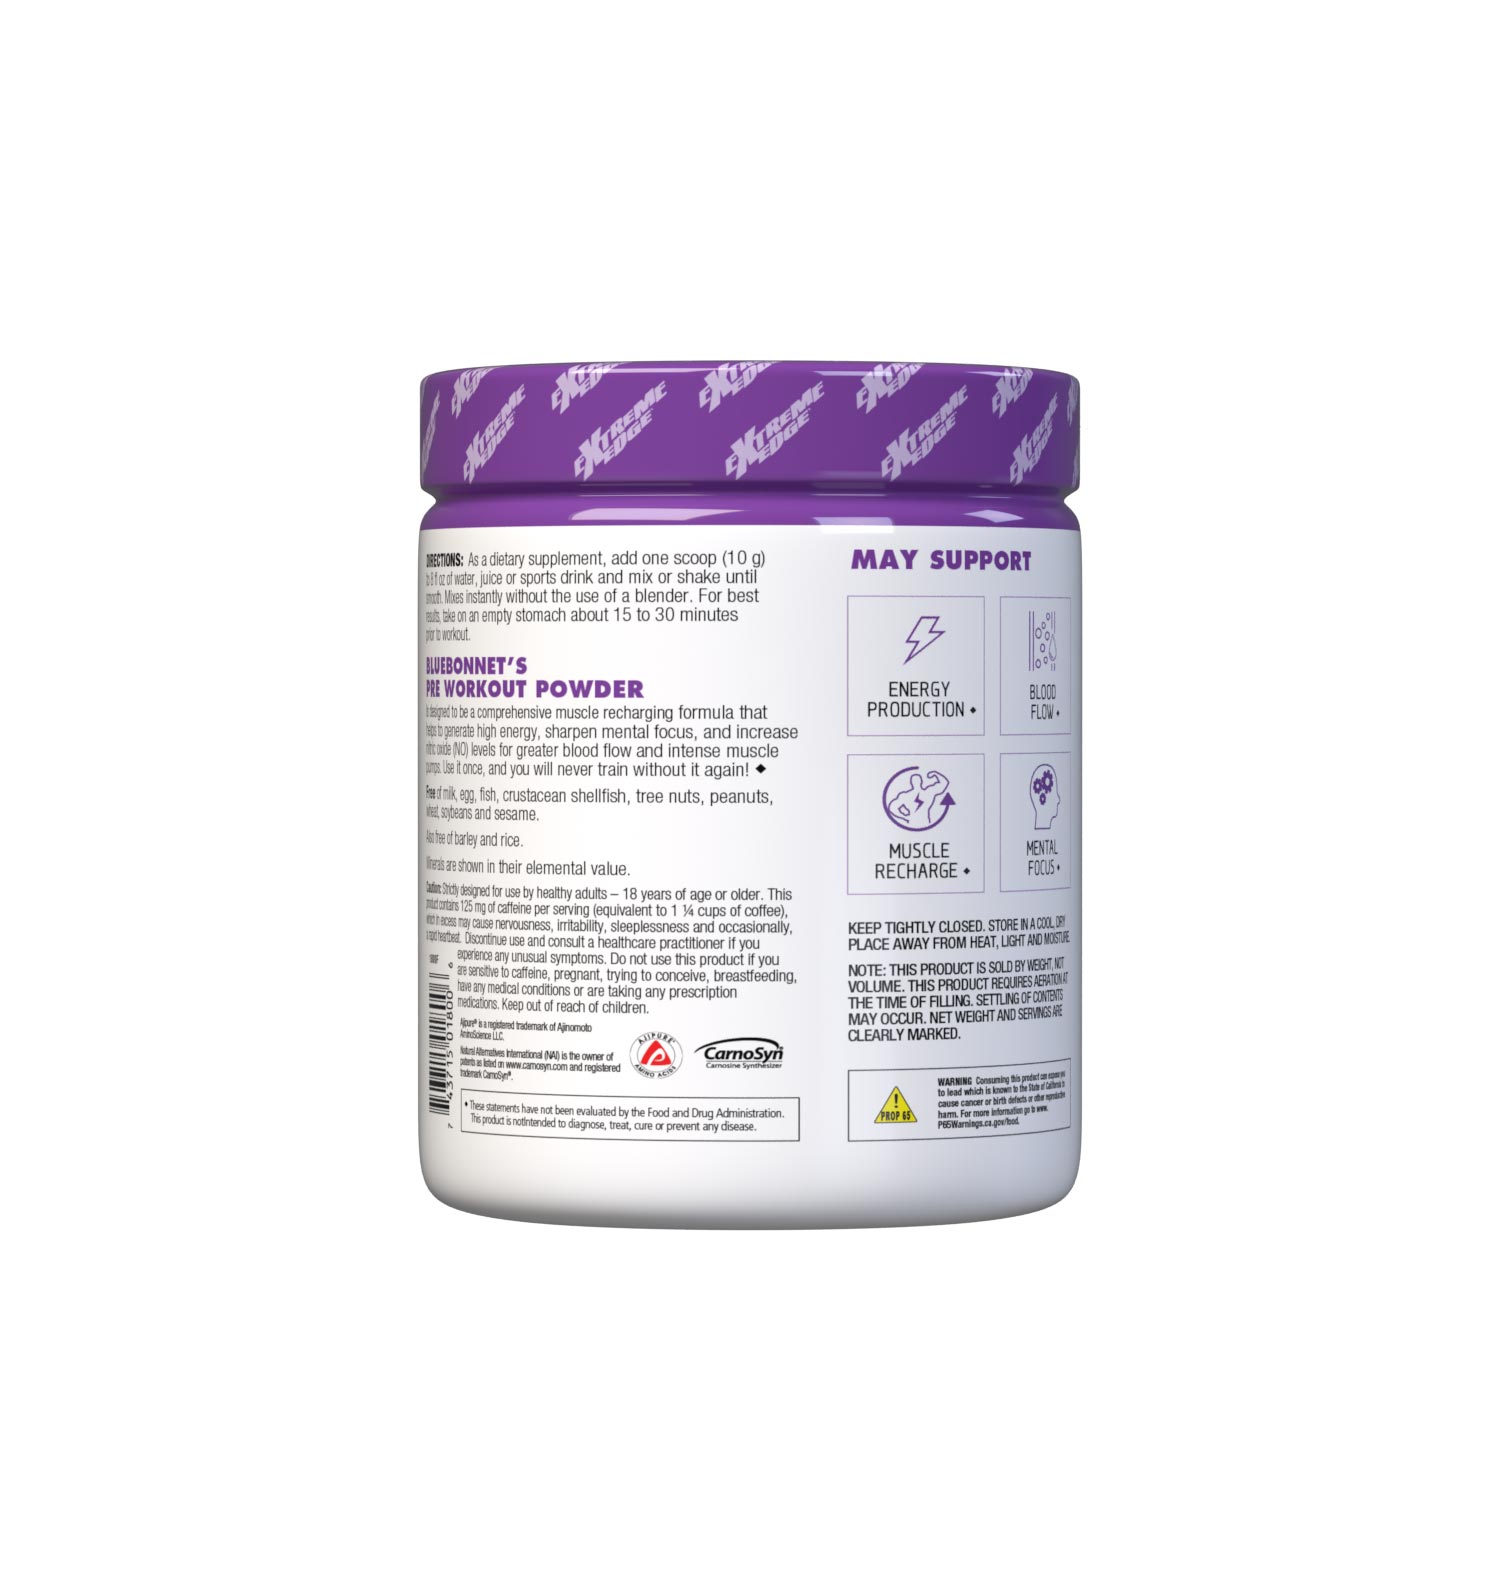 Bluebonnet's Grape Flavored Pre Workout powder is designed to be one of the most comprehensive, muscle recharging formulas ever created. This triple-turbo, super-charged formula generates high energy, sharpens mental concentration, and increases nitric oxide (NO) levels for greater blood flow and intense muscle pumps. Description panel. #size_0.66 lb